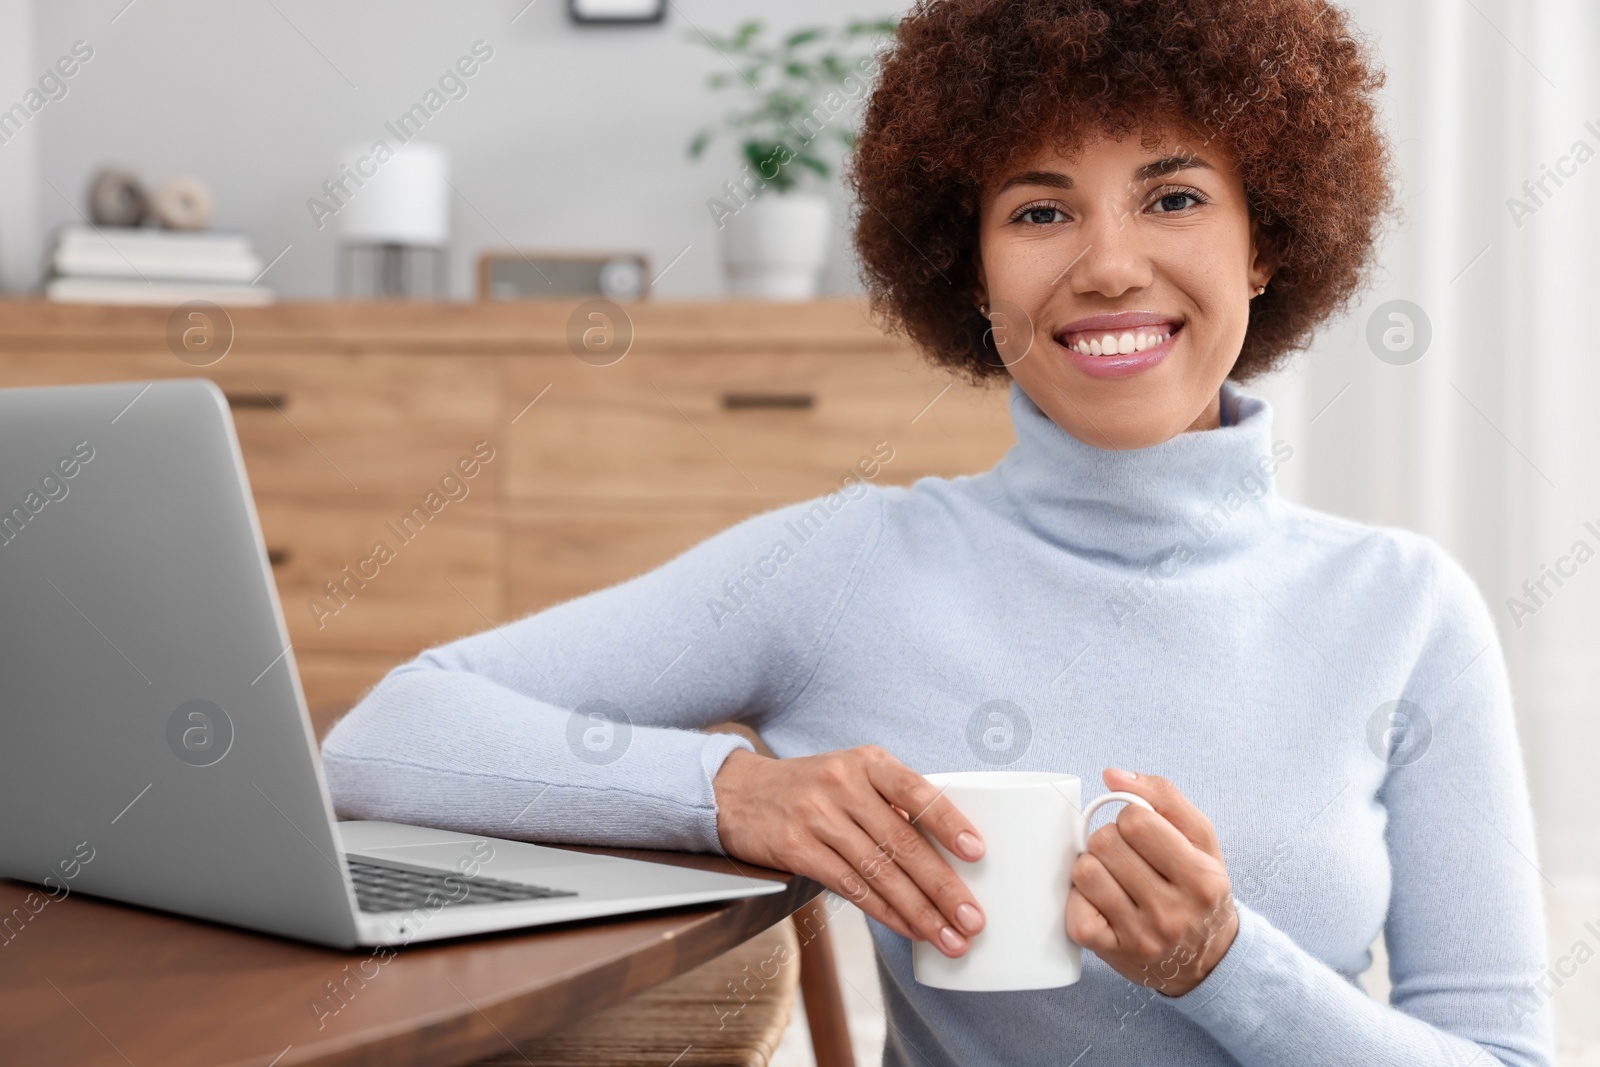 Photo of Beautiful young woman using laptop and drinking coffee at wooden table in room